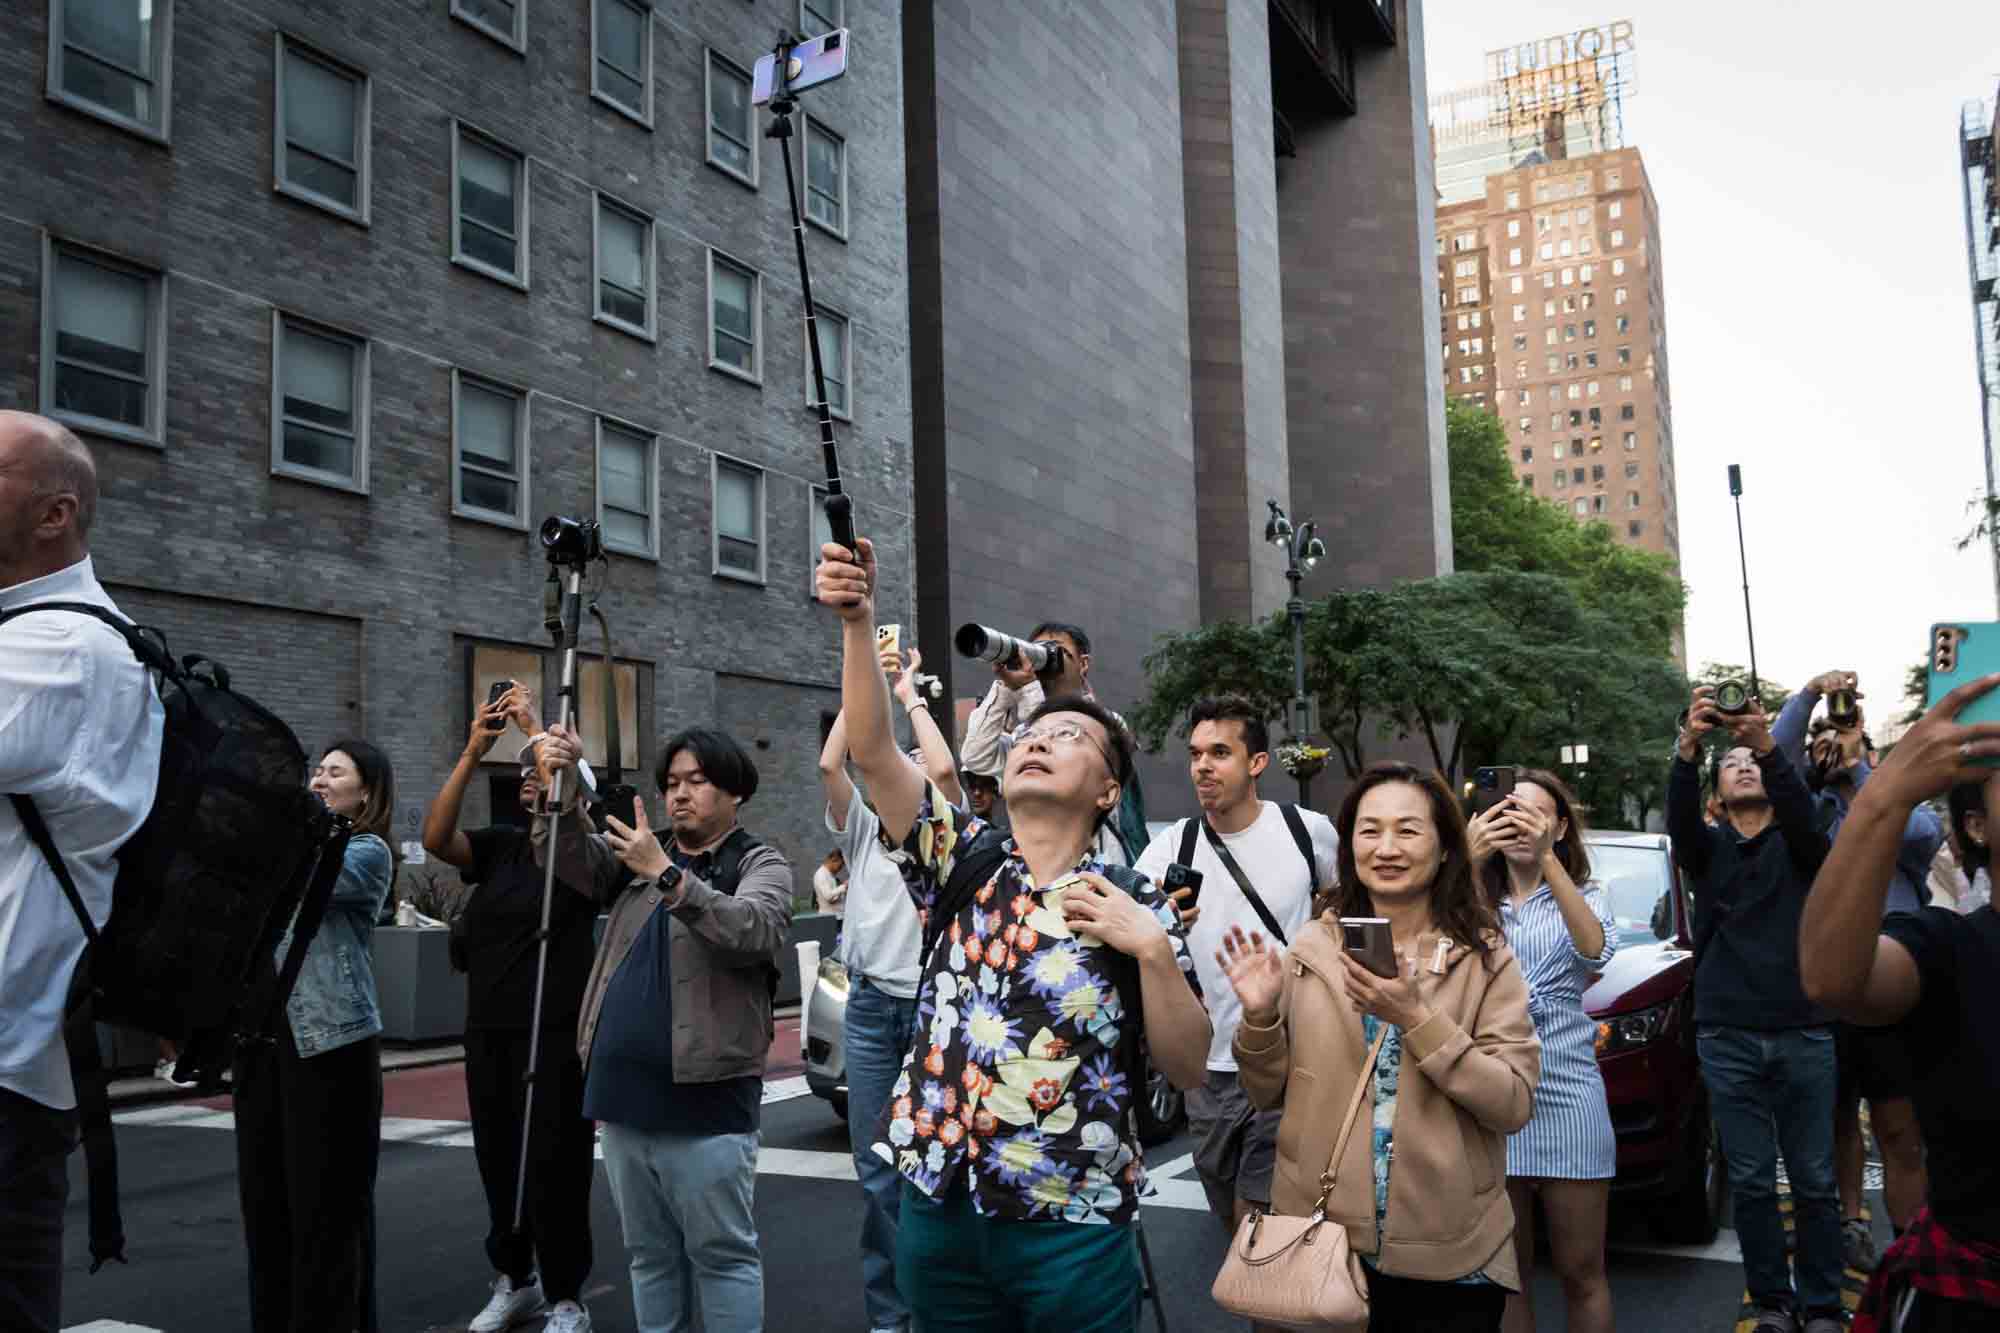 Asian man with cellphone on stick in a NYC street with cellphones in hand during Manhattanhenge